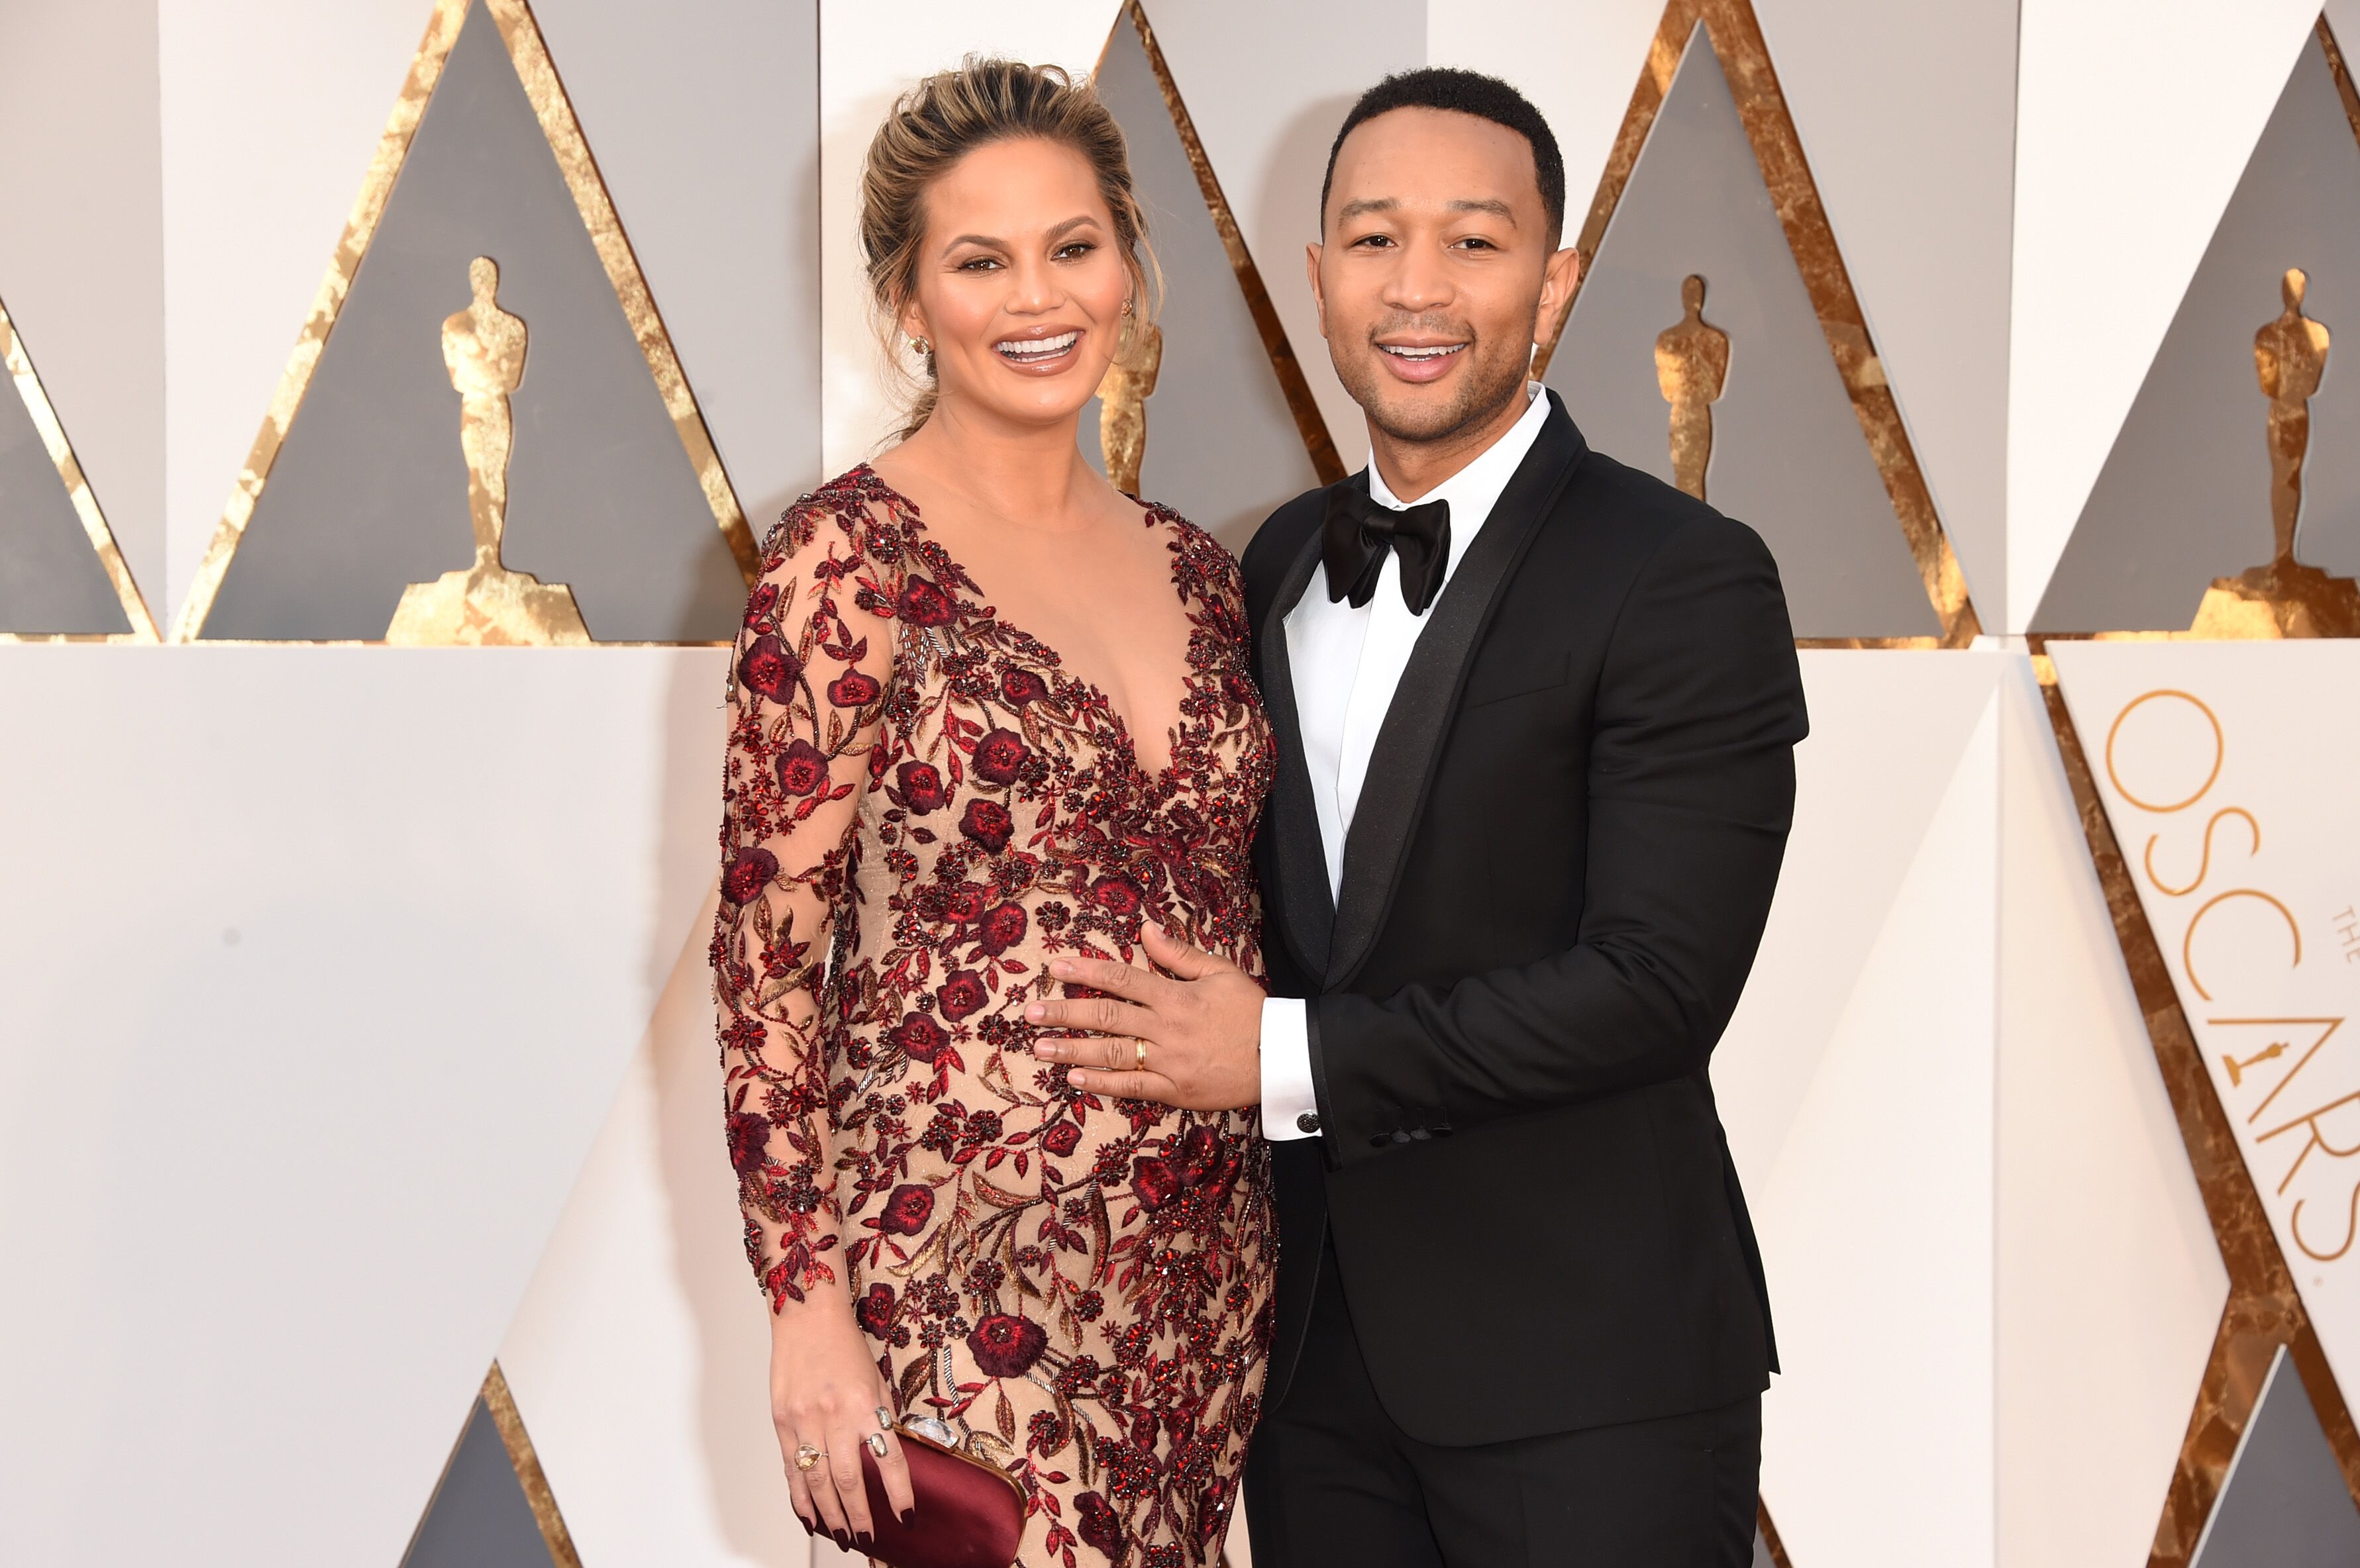 Chrissy Teigen and John Legend attend the 88th Annual Academy Awards. | Source: Getty Images